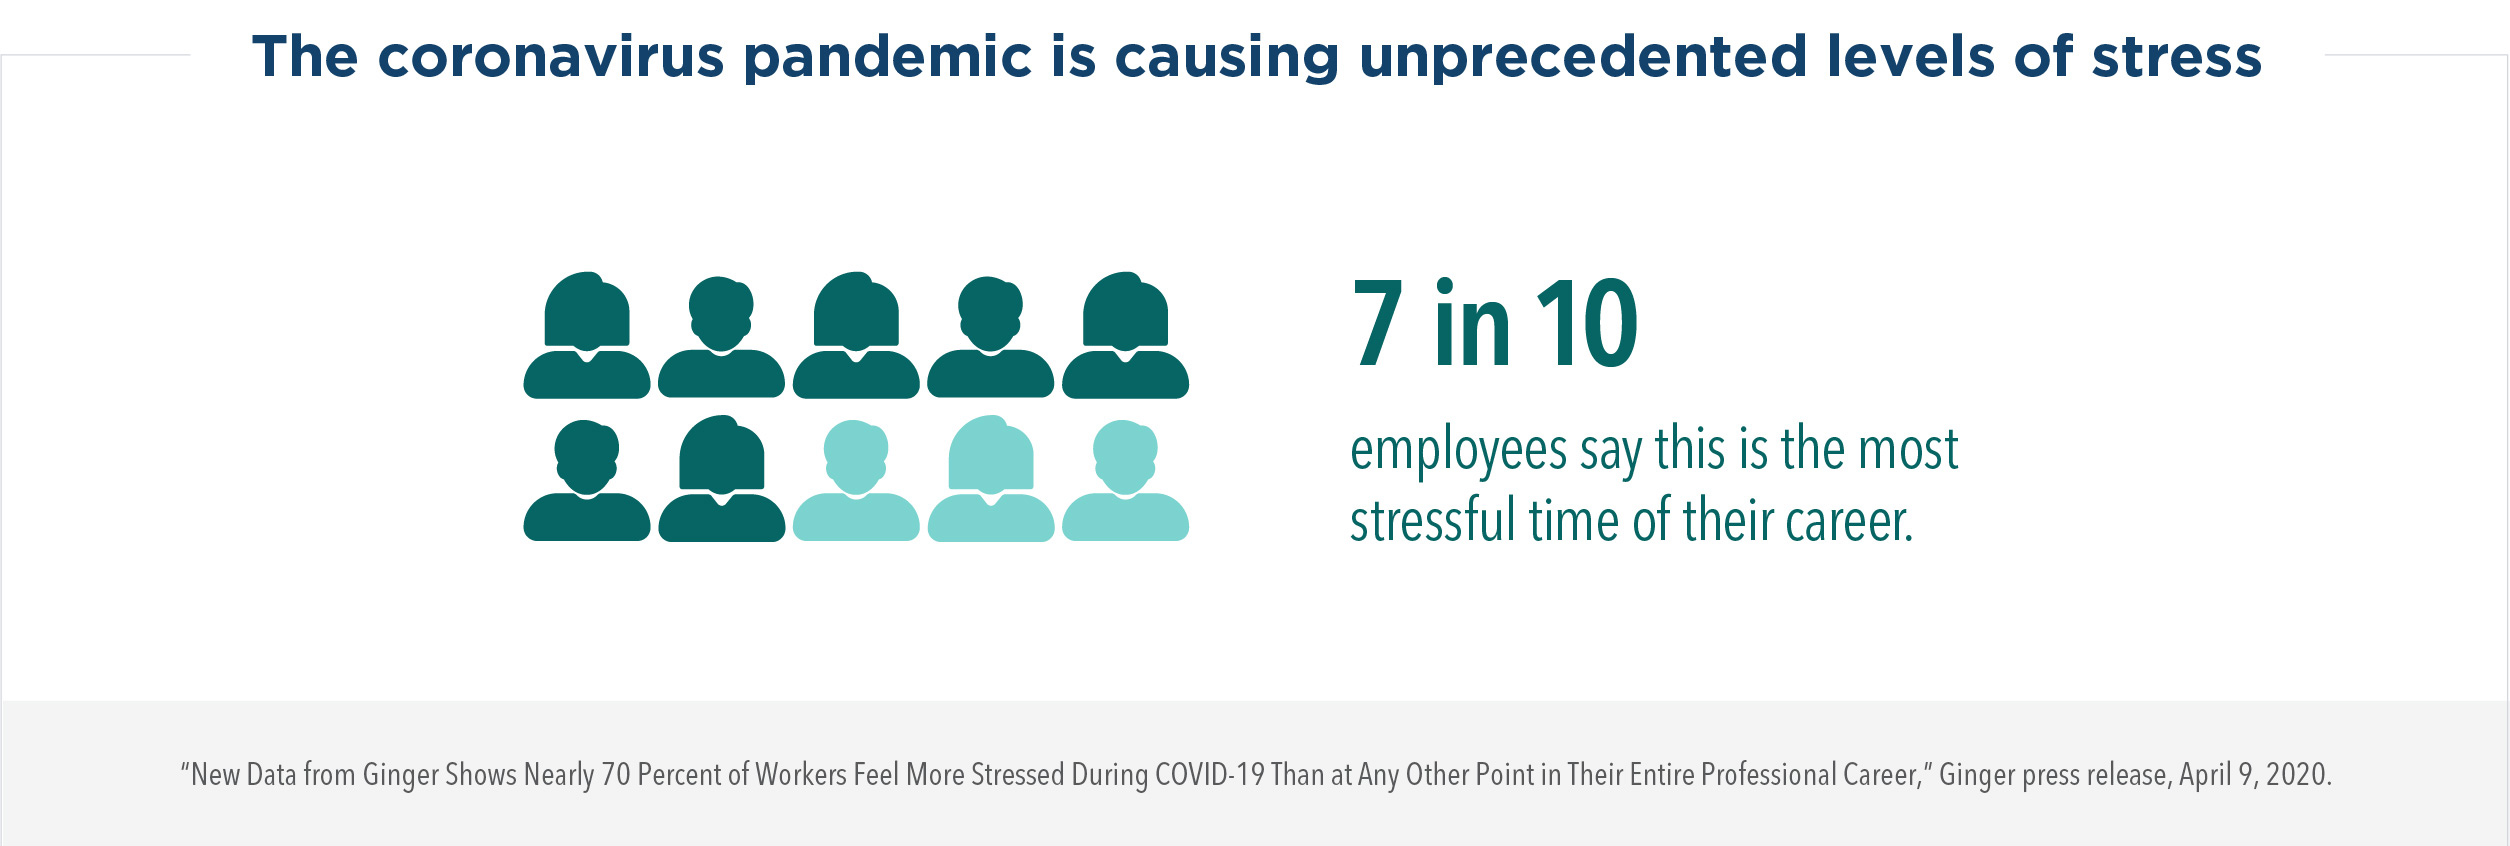 The coronavirus pandemic is causing unprecedented levels of stress. 7 in 10 employees say this is the most stressful time of their career.